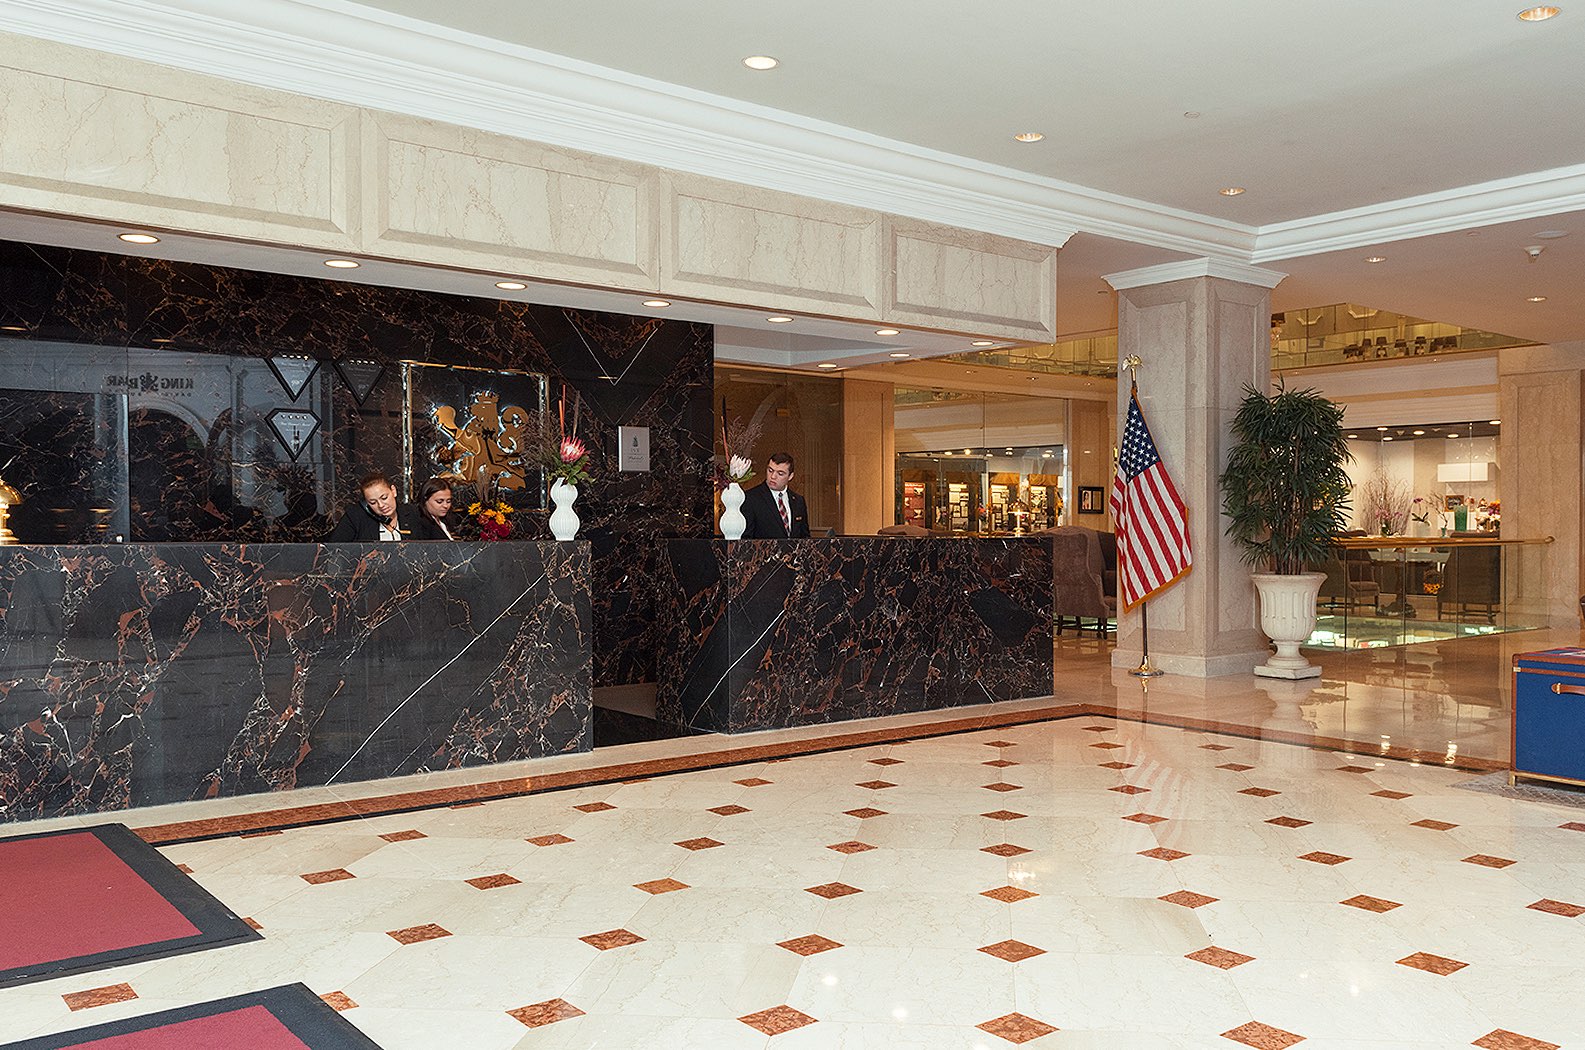 Long Island Hotels | Browse Photo Gallery | Garden City Hotel